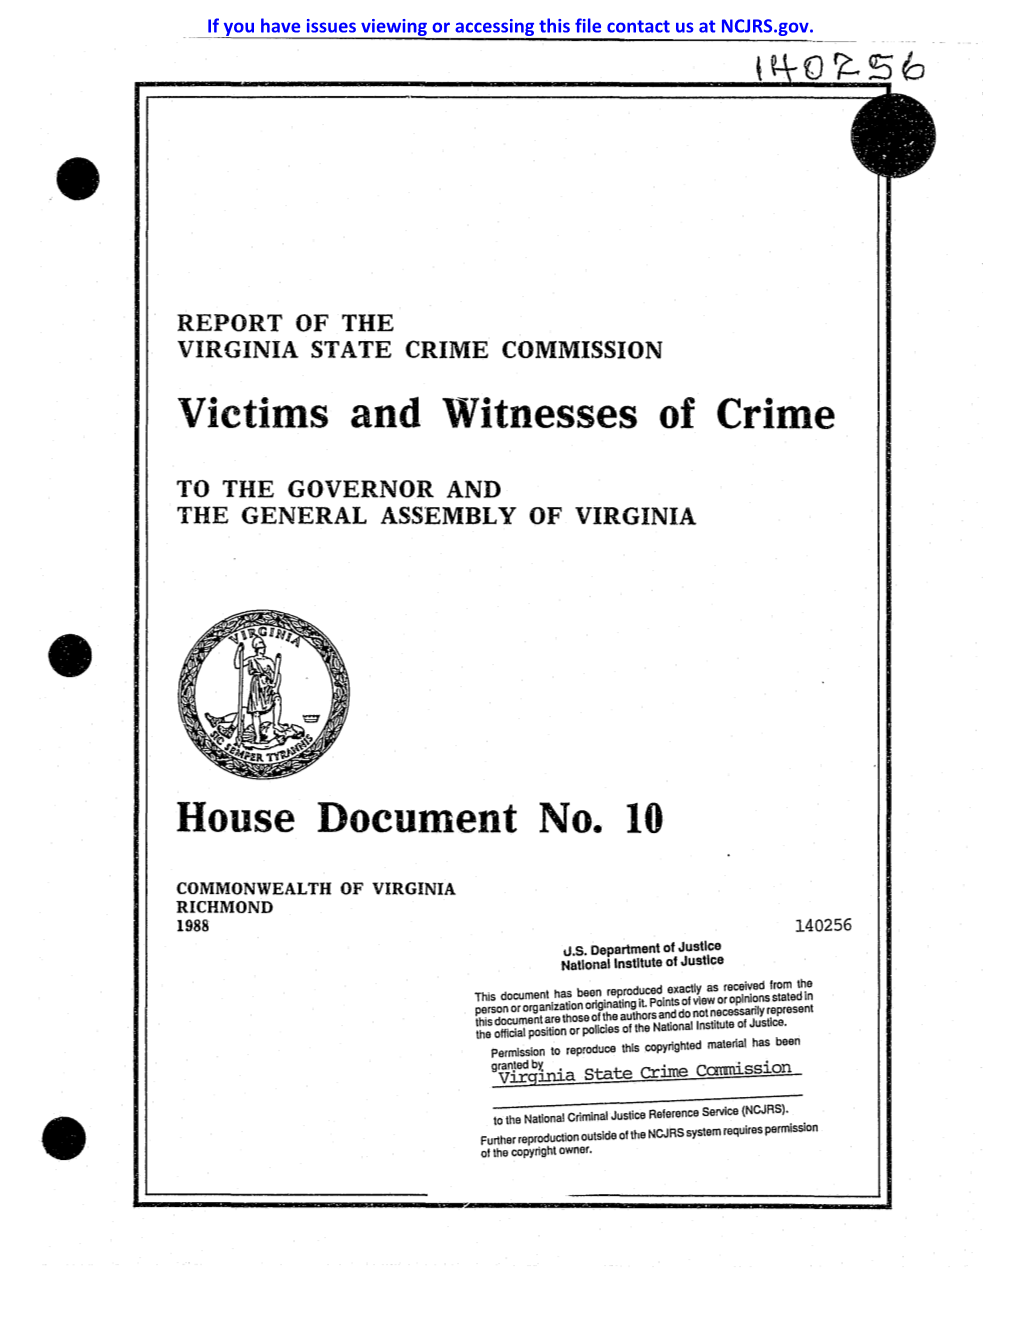 Victims and Witnesses of Crime House Document No. 10